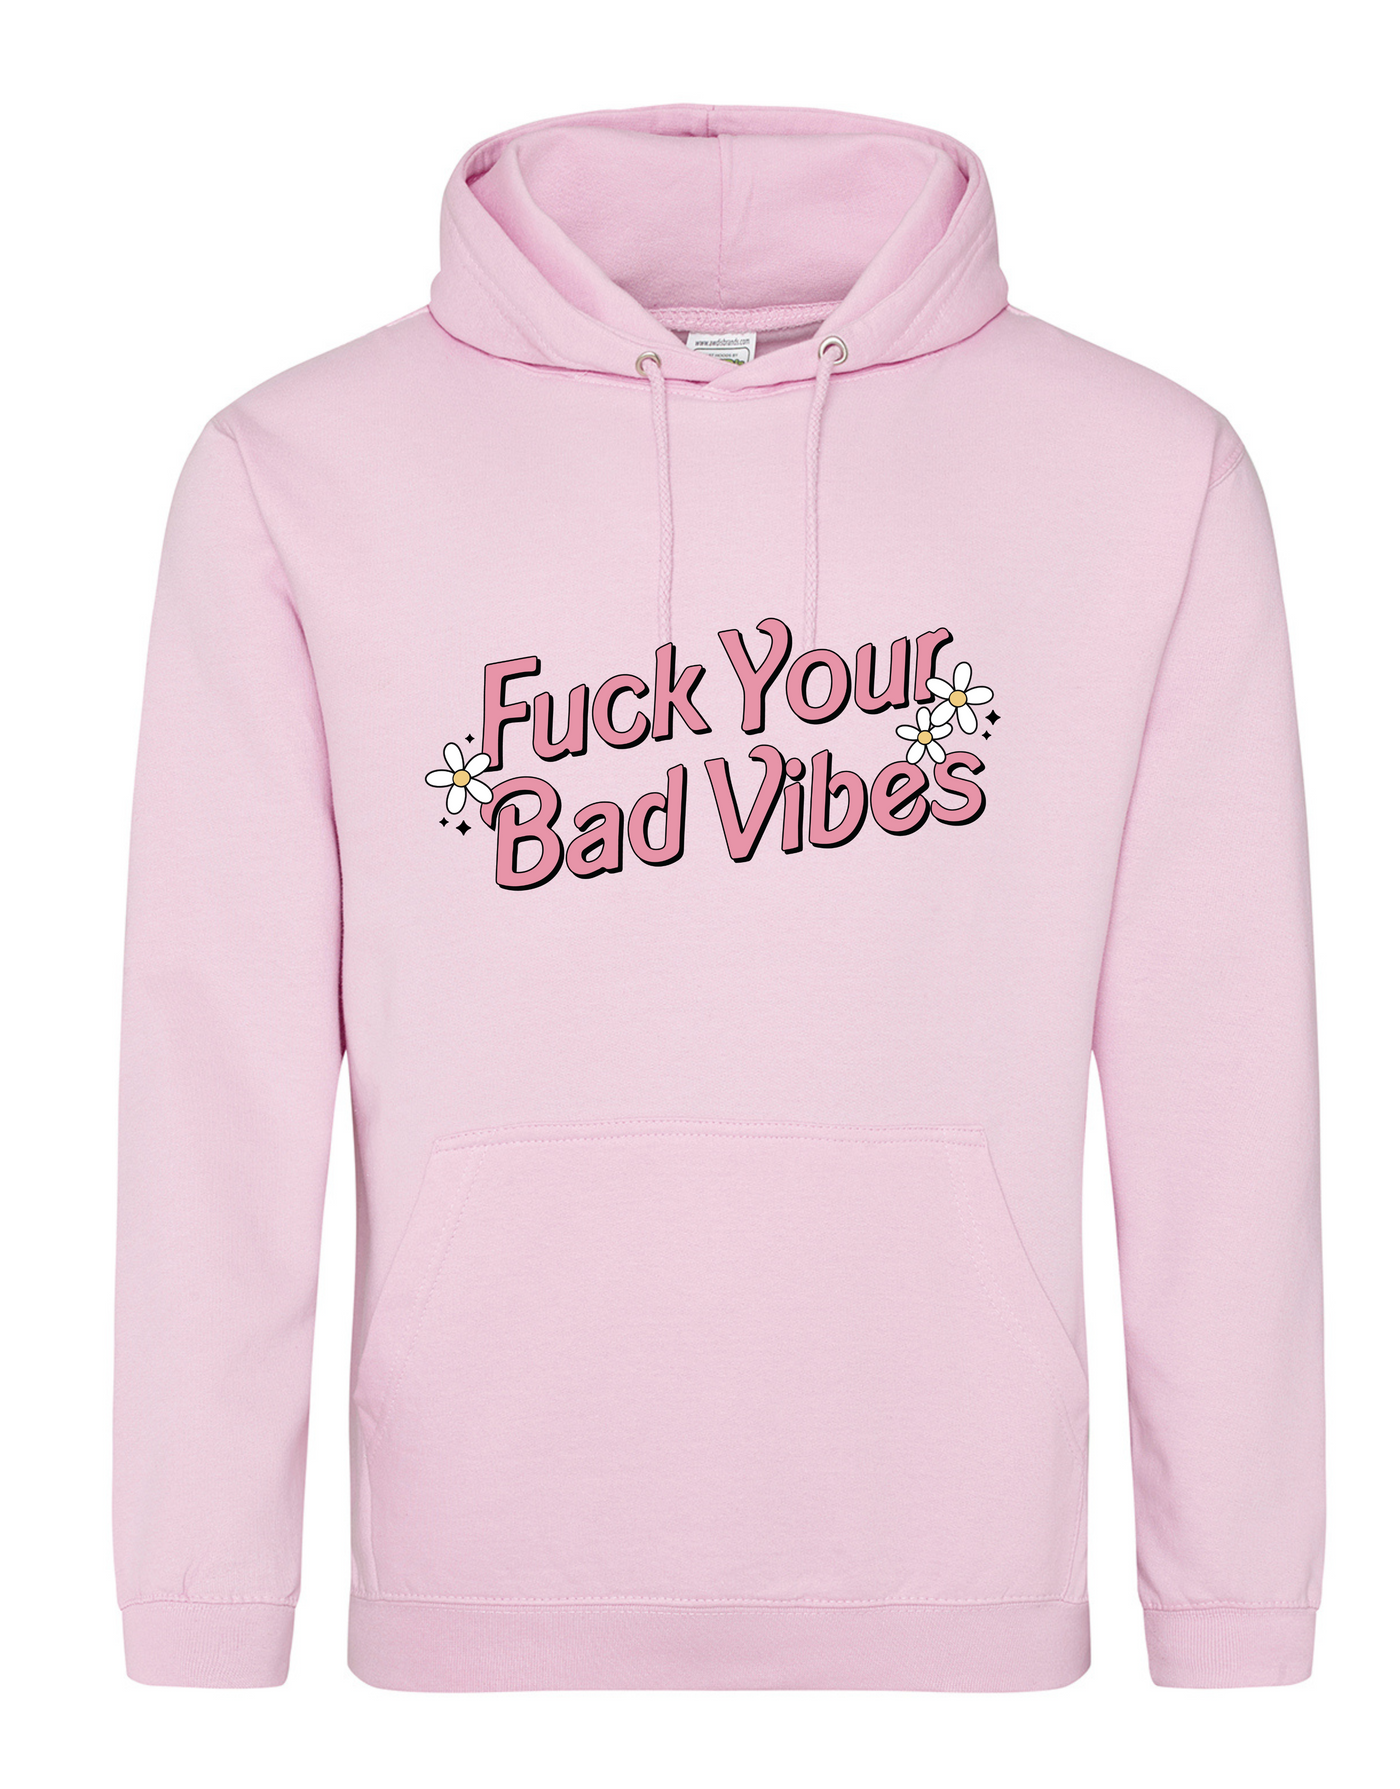 Light Pink "Fuck Your Bad Vibes" Standard Hoodie